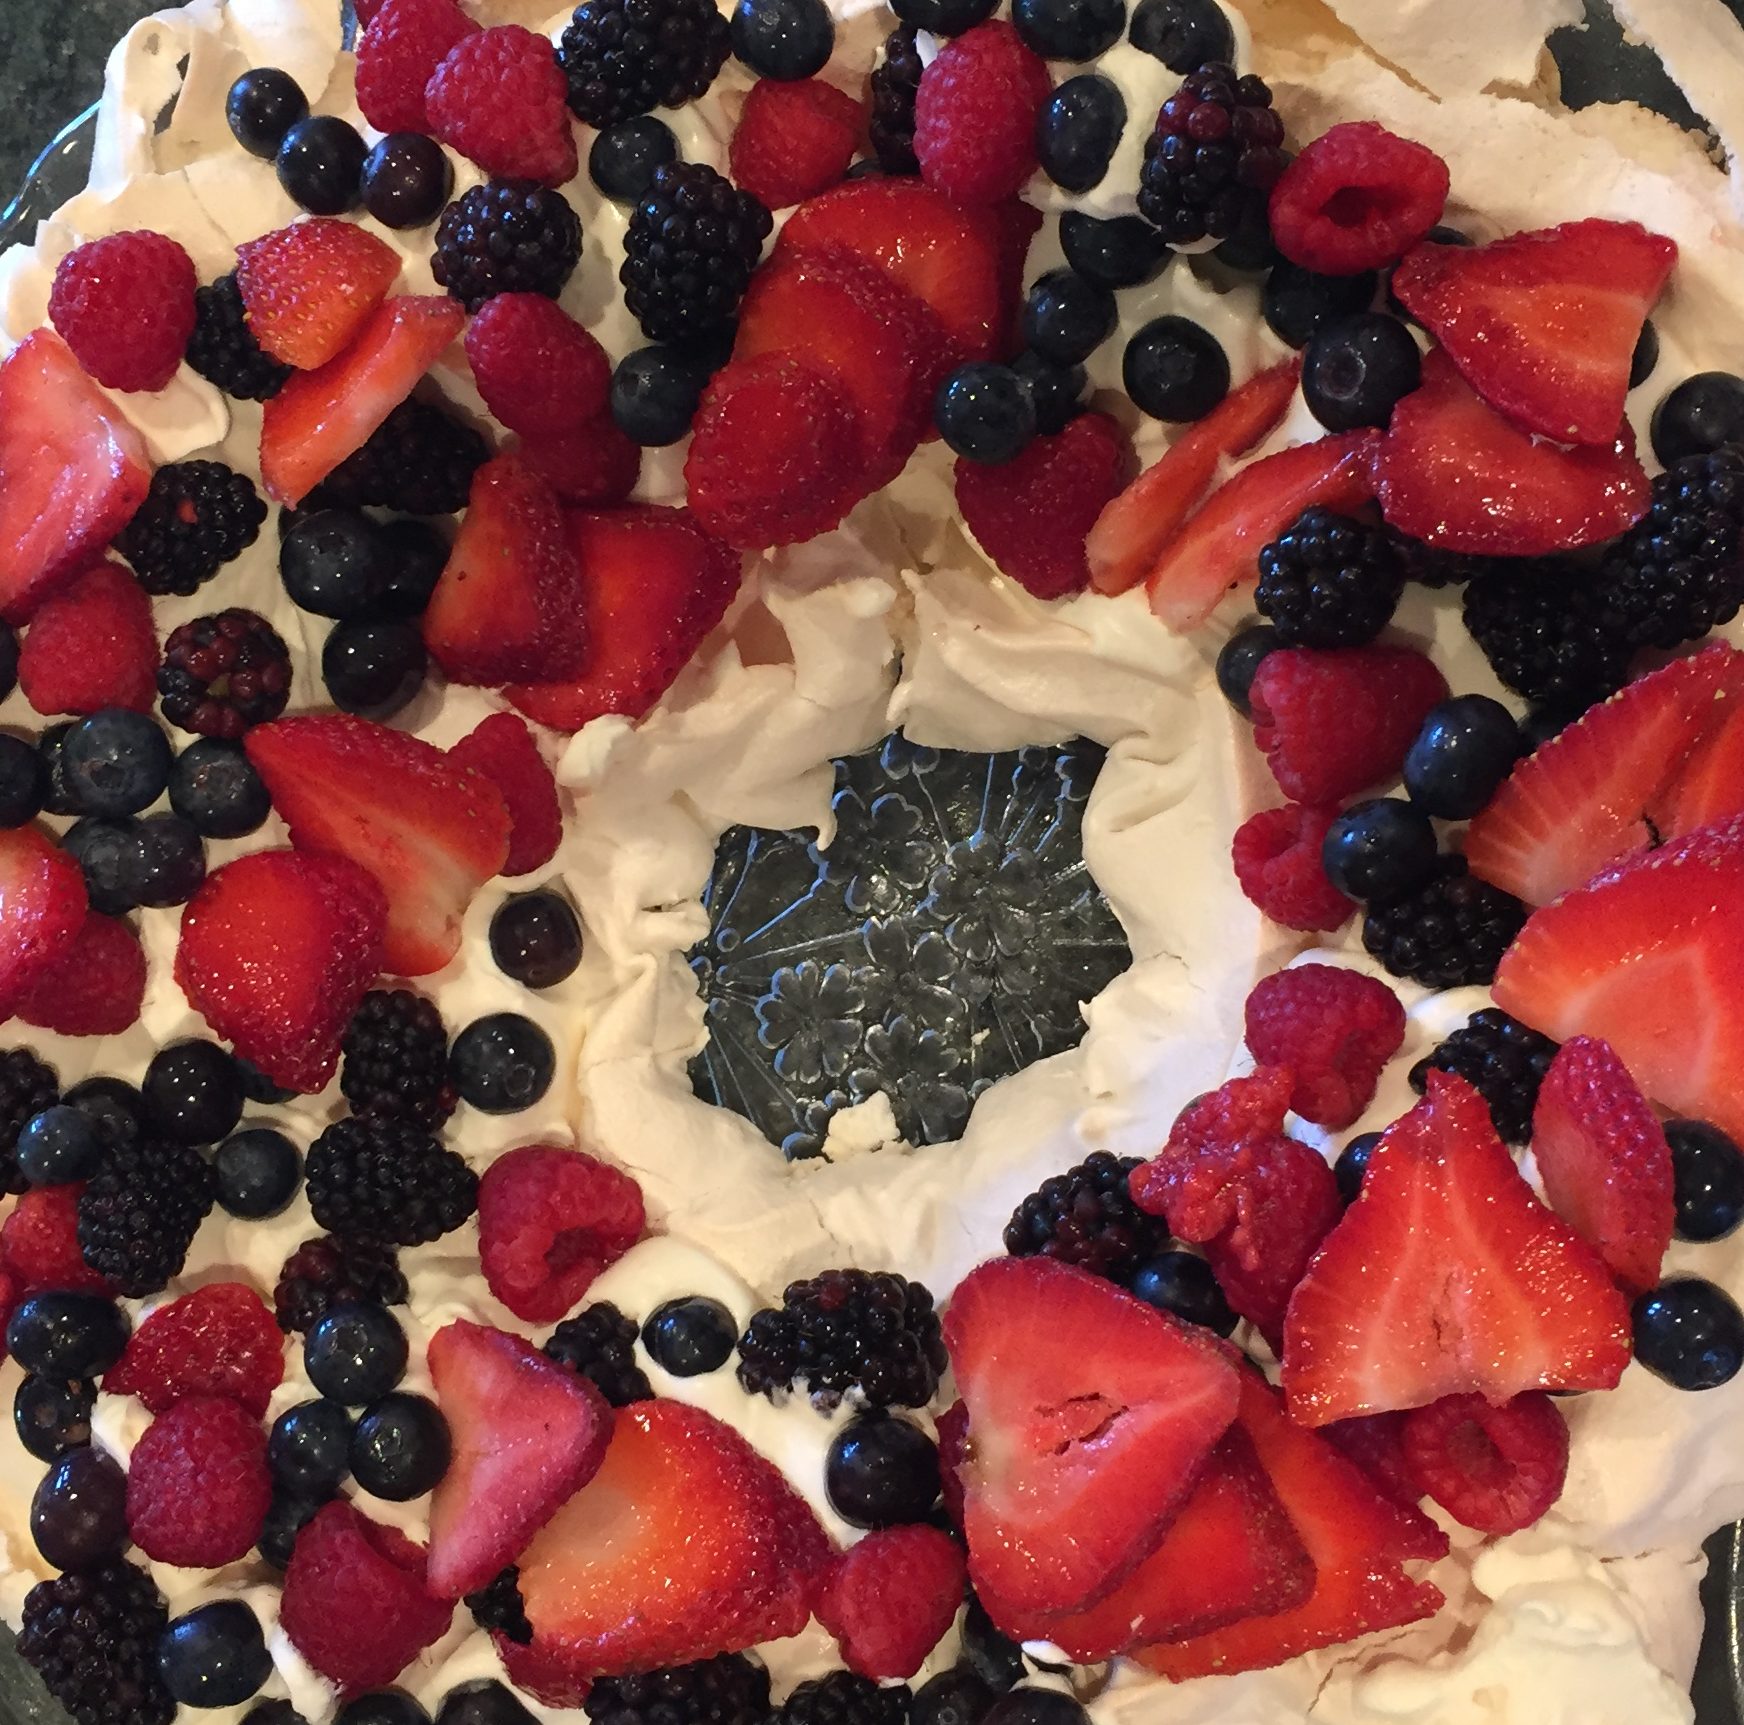 Pavlova with berries can be very patriotic